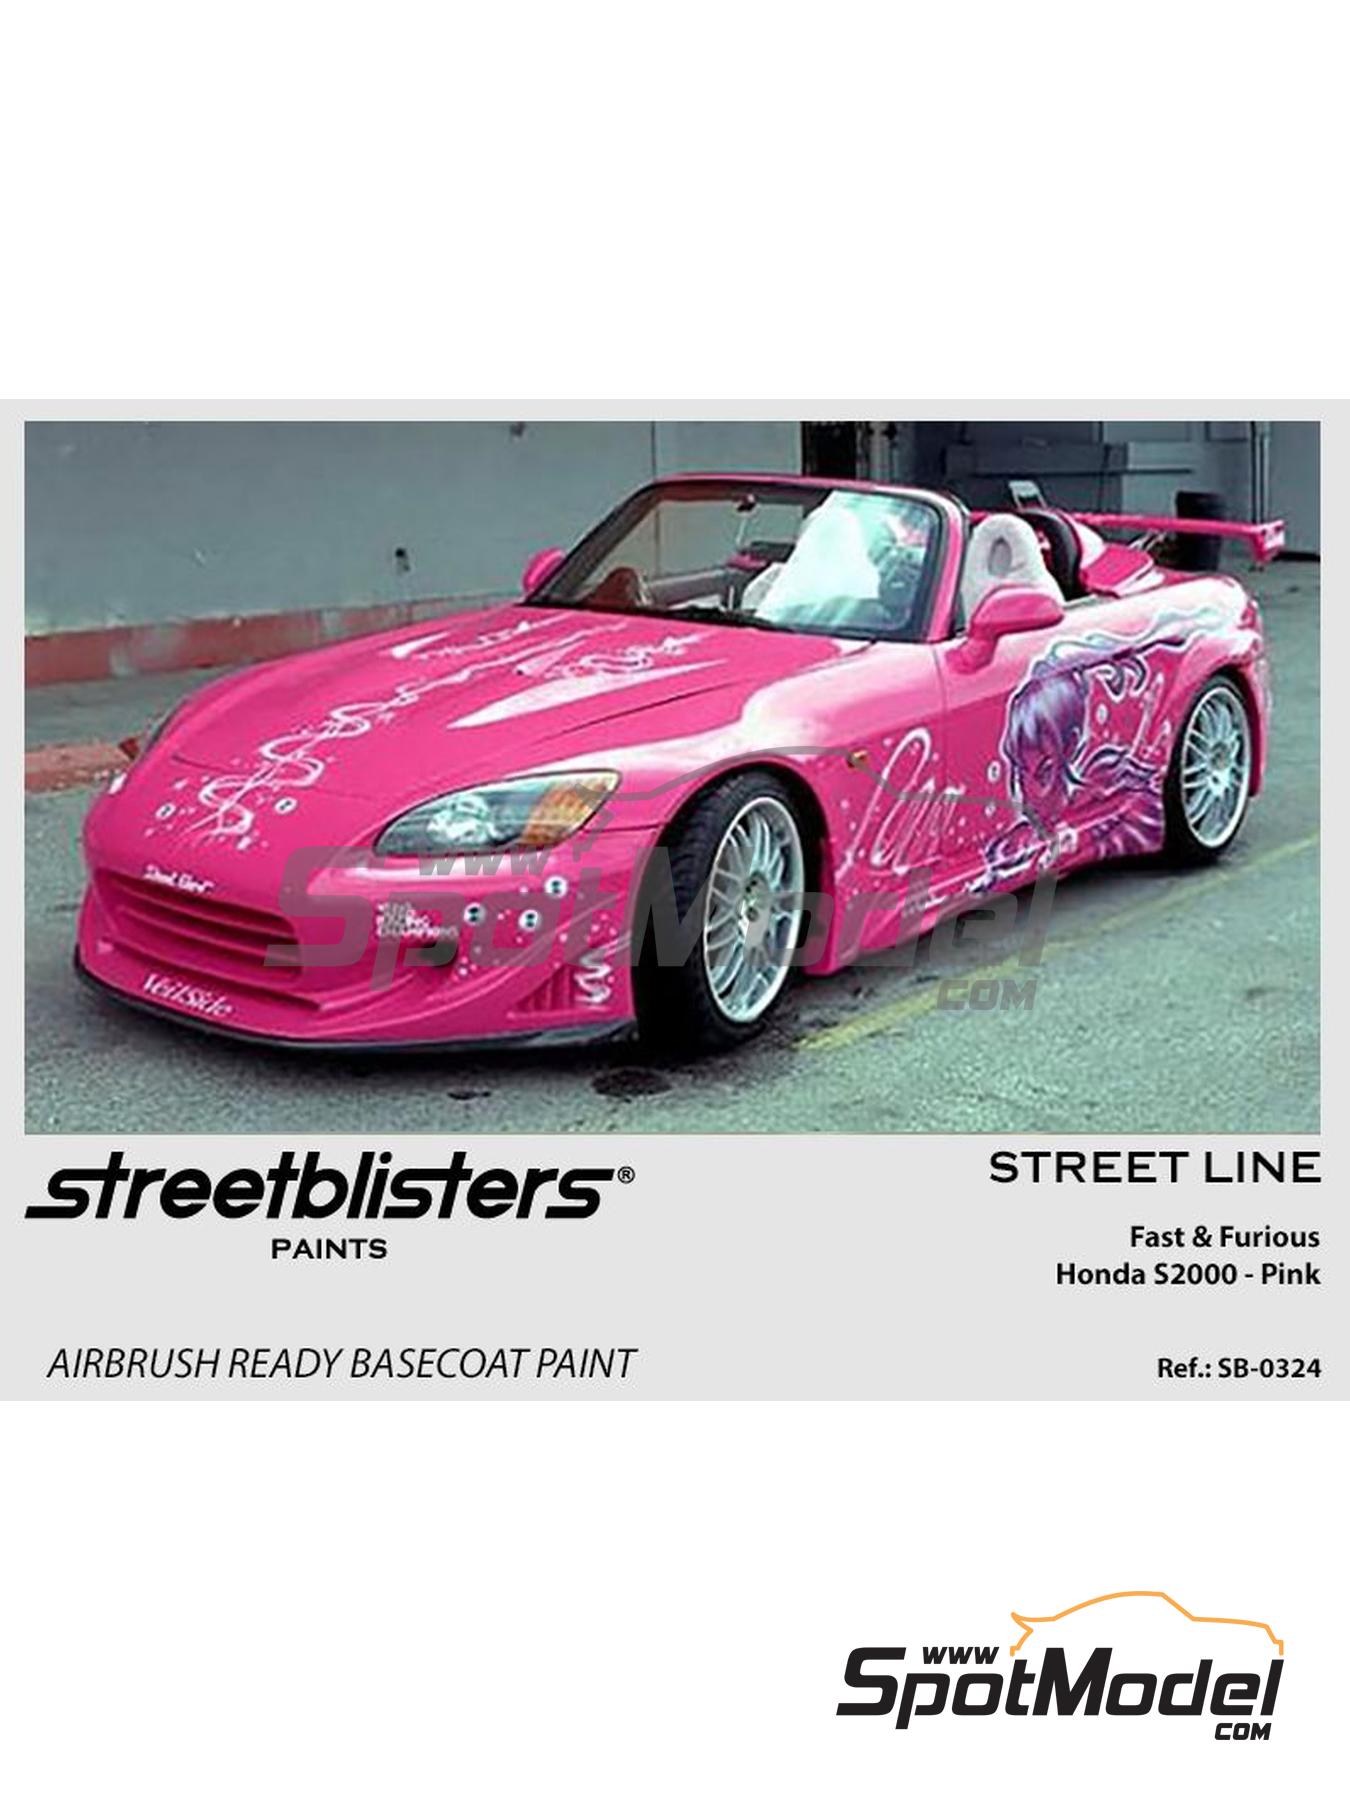 Streetblisters Paint For Airbrush Honda S00 Fast Furious Pink 1 X 30ml For Ukrainian Scale Cars Production Reference 24t043 Ref Sb30 0324 Spotmodel